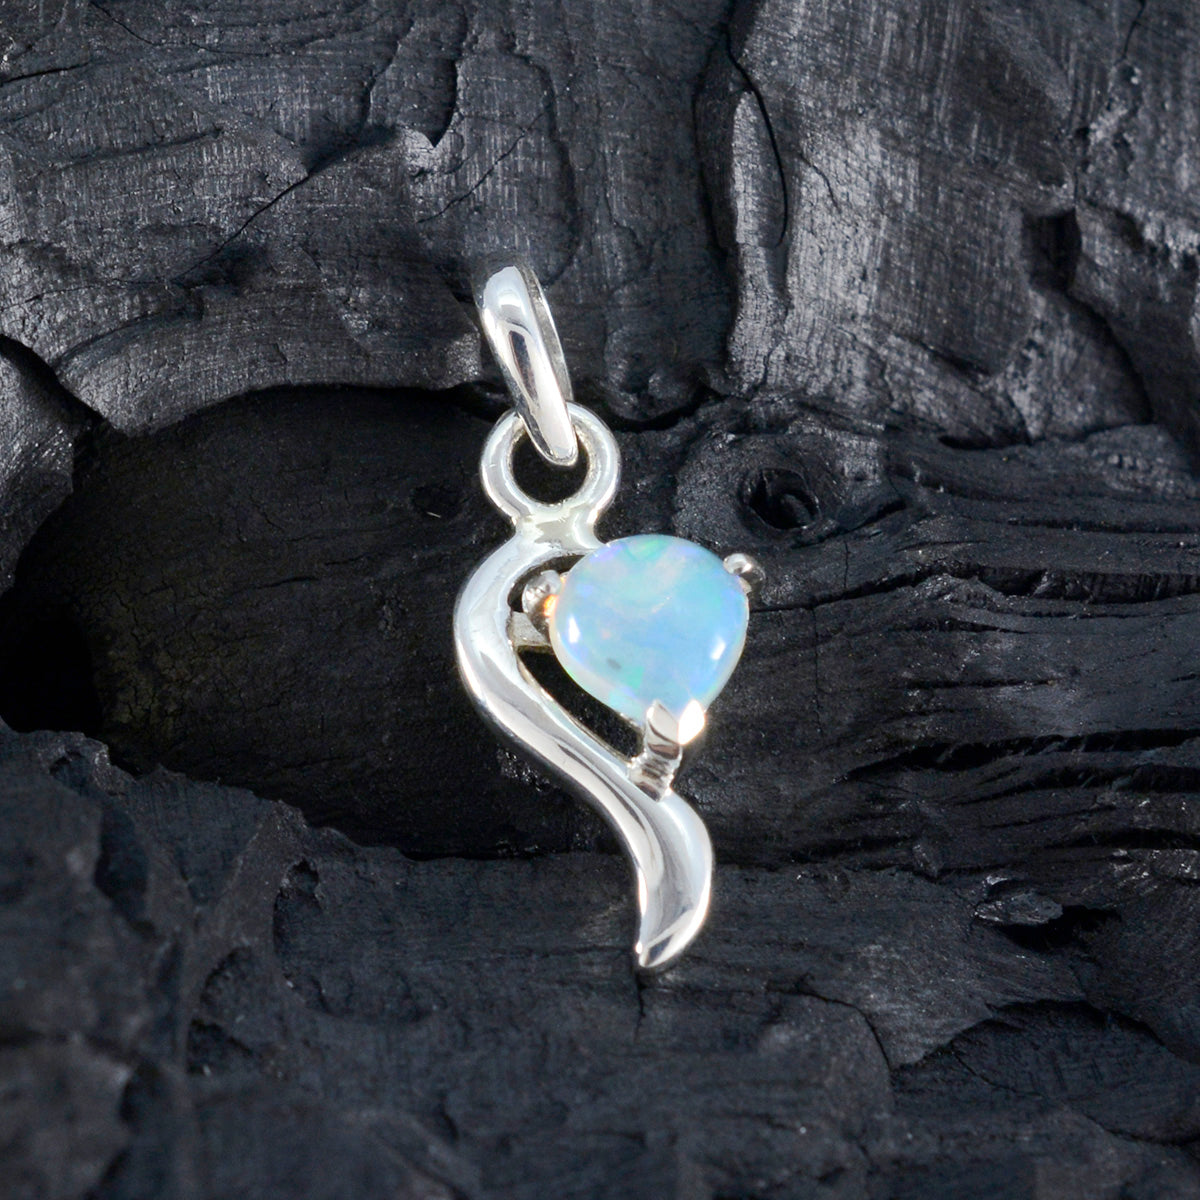 Riyo Beauteous Gems Heart Cabochon White Opal Solid Silver Pendant Gift For Wedding